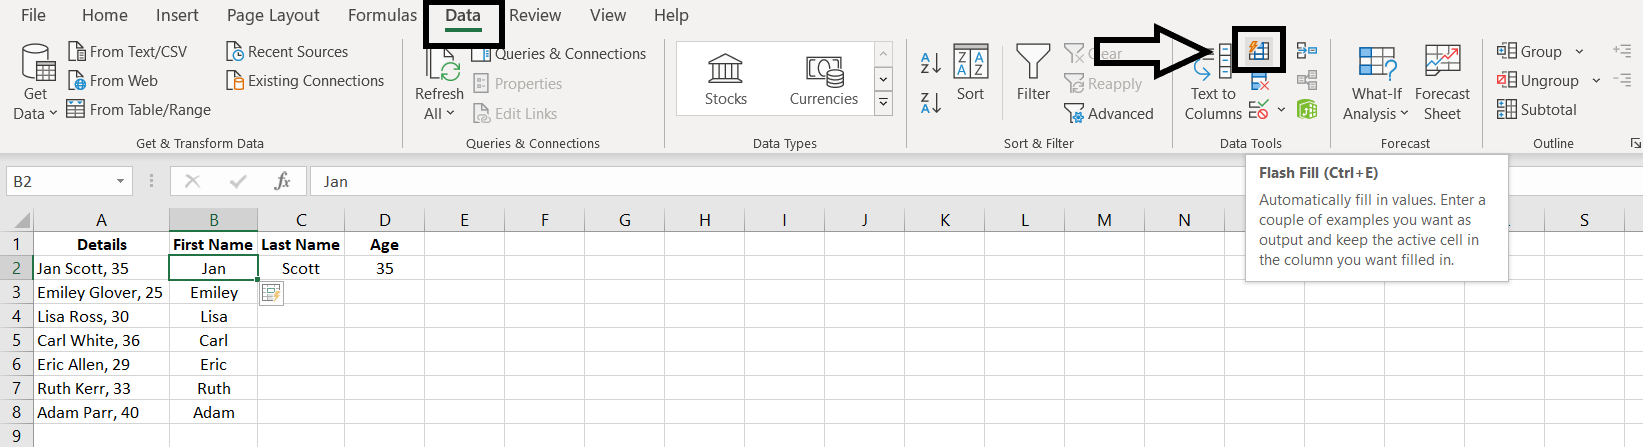 excel split data into two cells